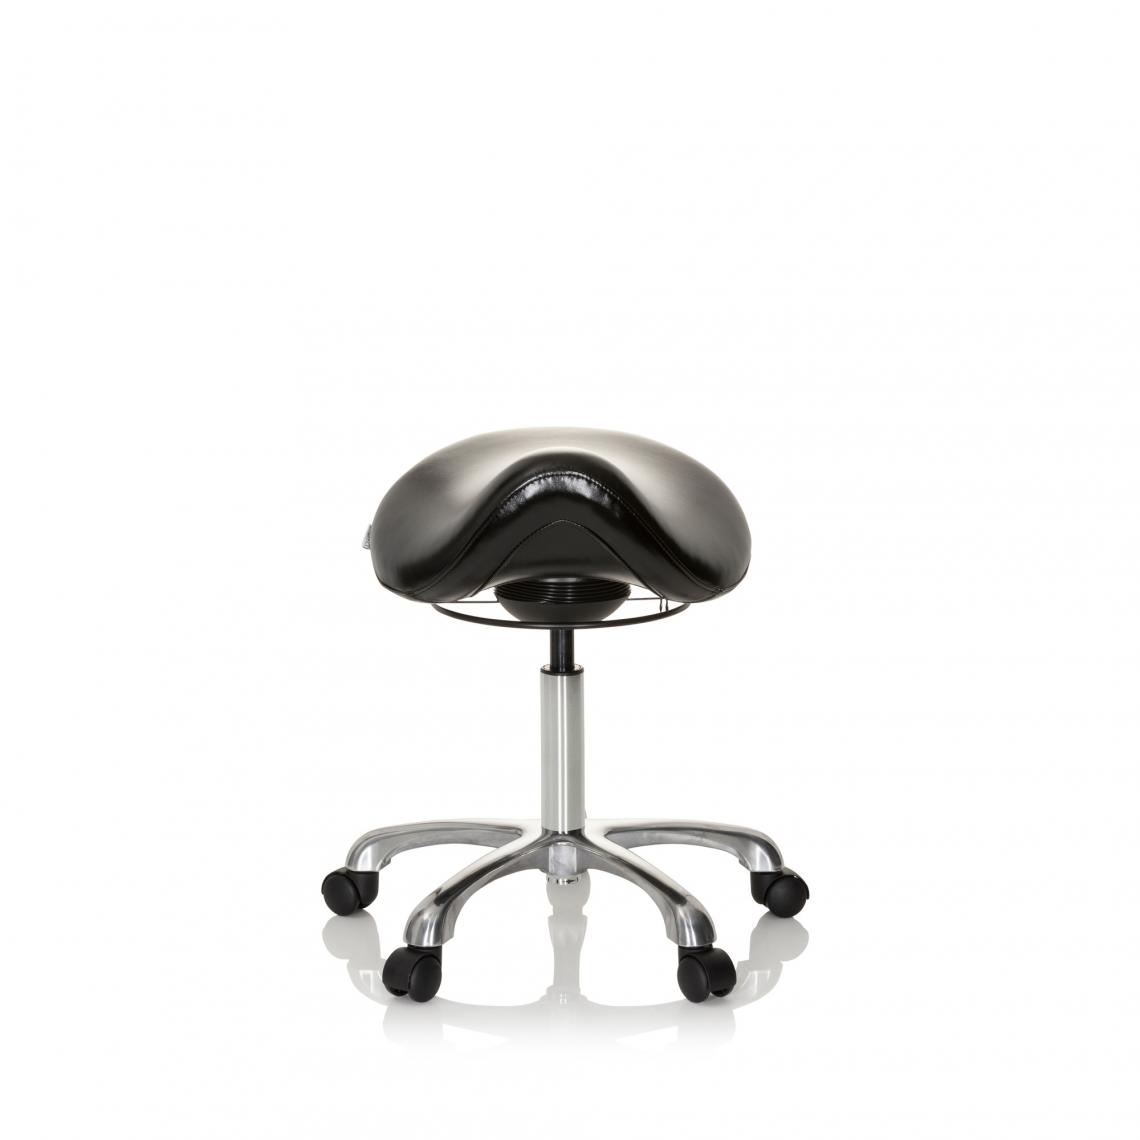 Hjh Office - Selle tabouret / chaise ORTHO SIT simili cuir noir hjh OFFICE - Tabourets